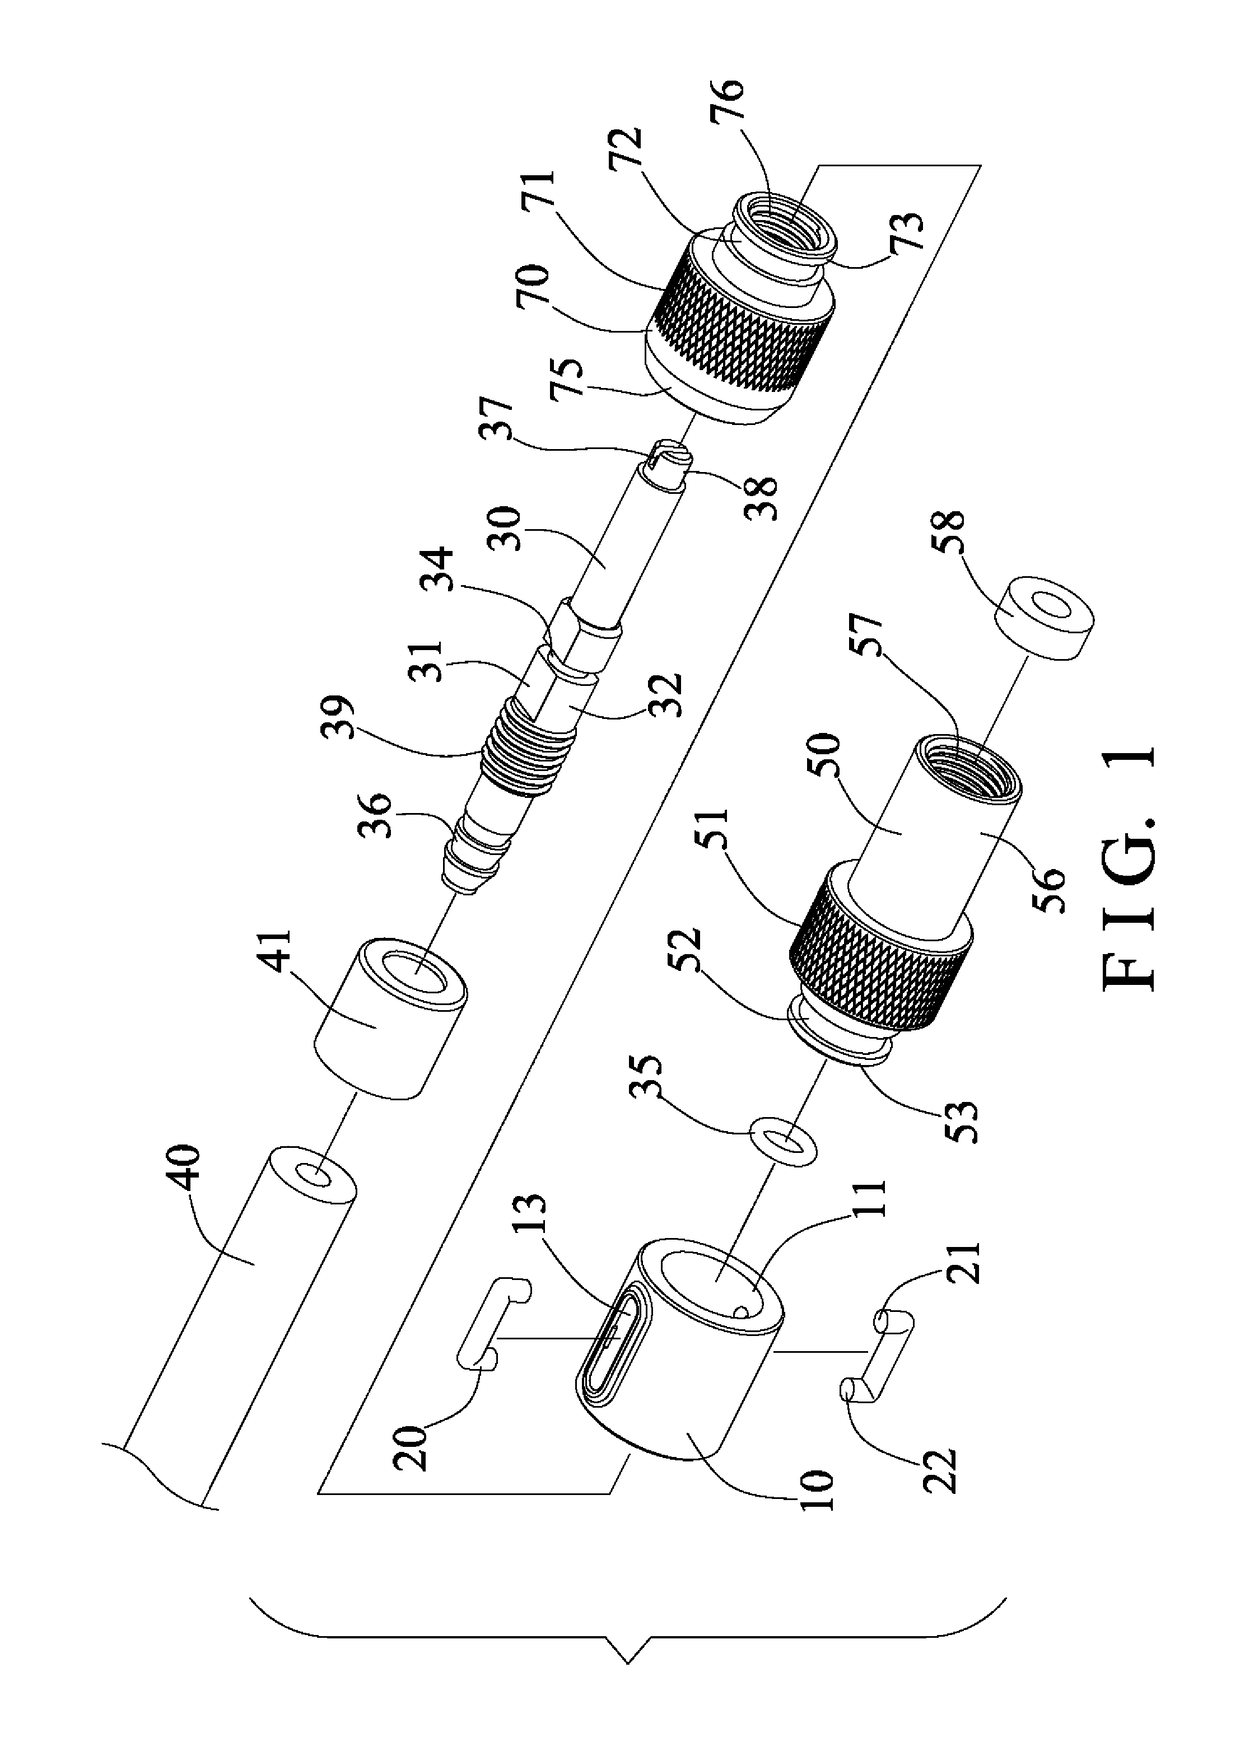 Air valve connecting device